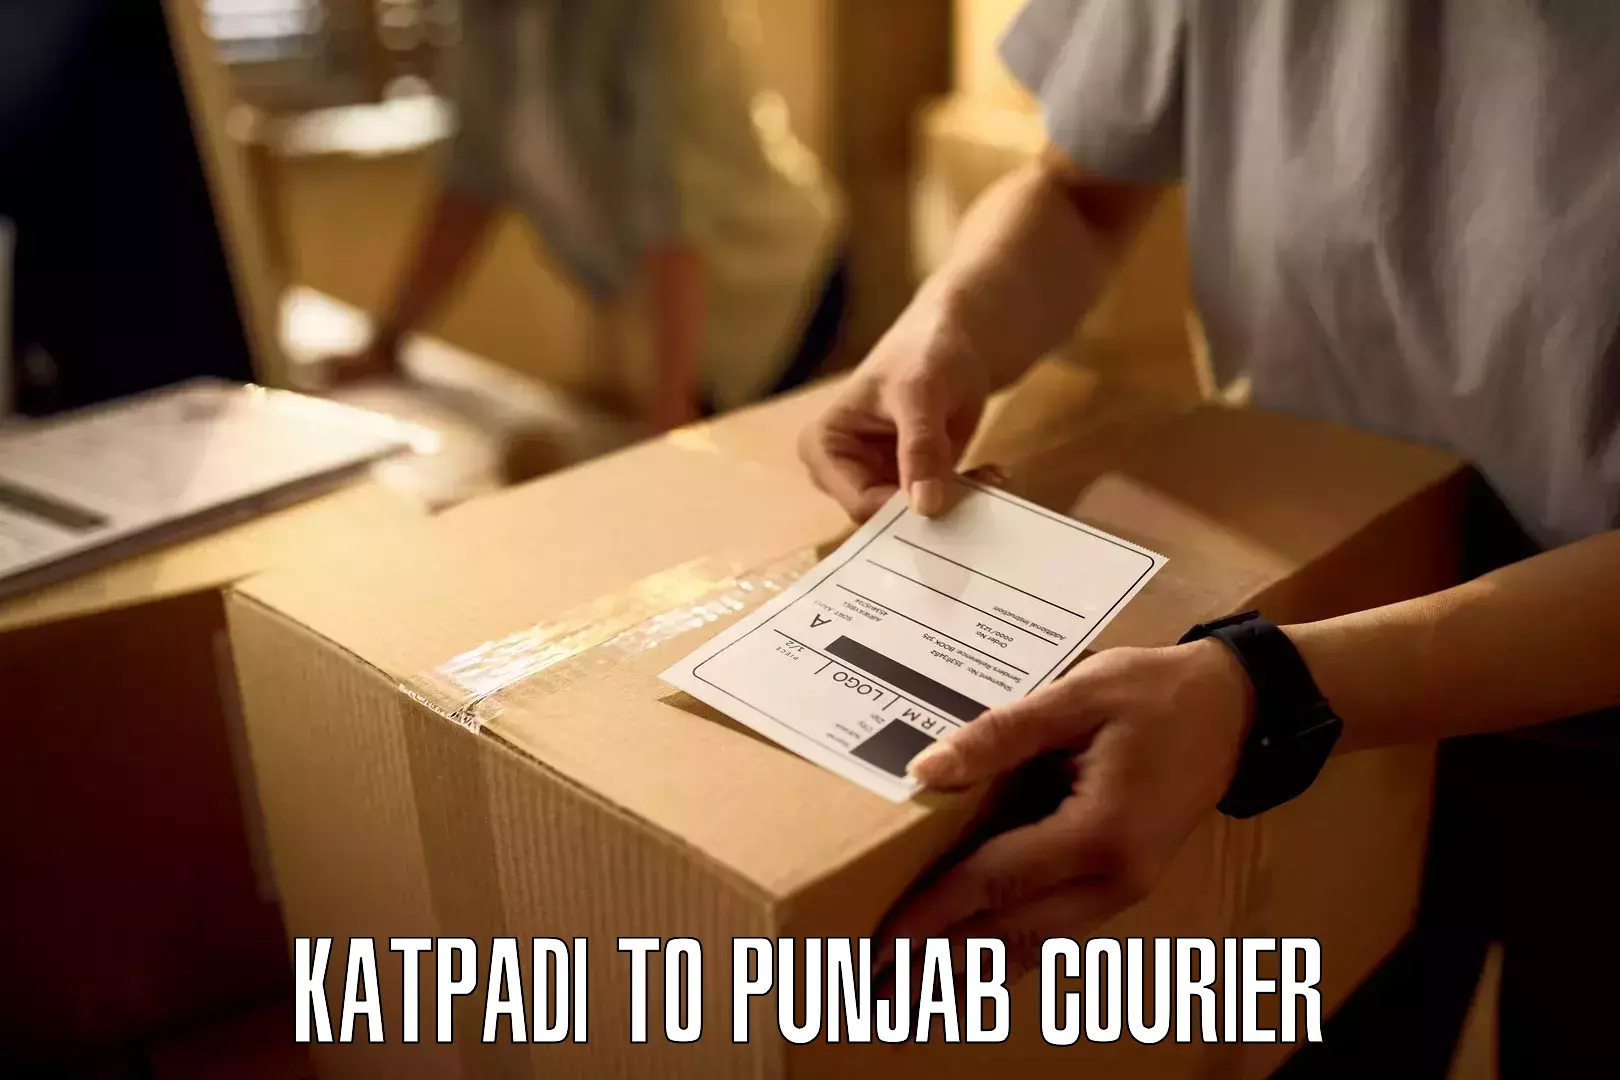 Easy access courier services Katpadi to Mohali